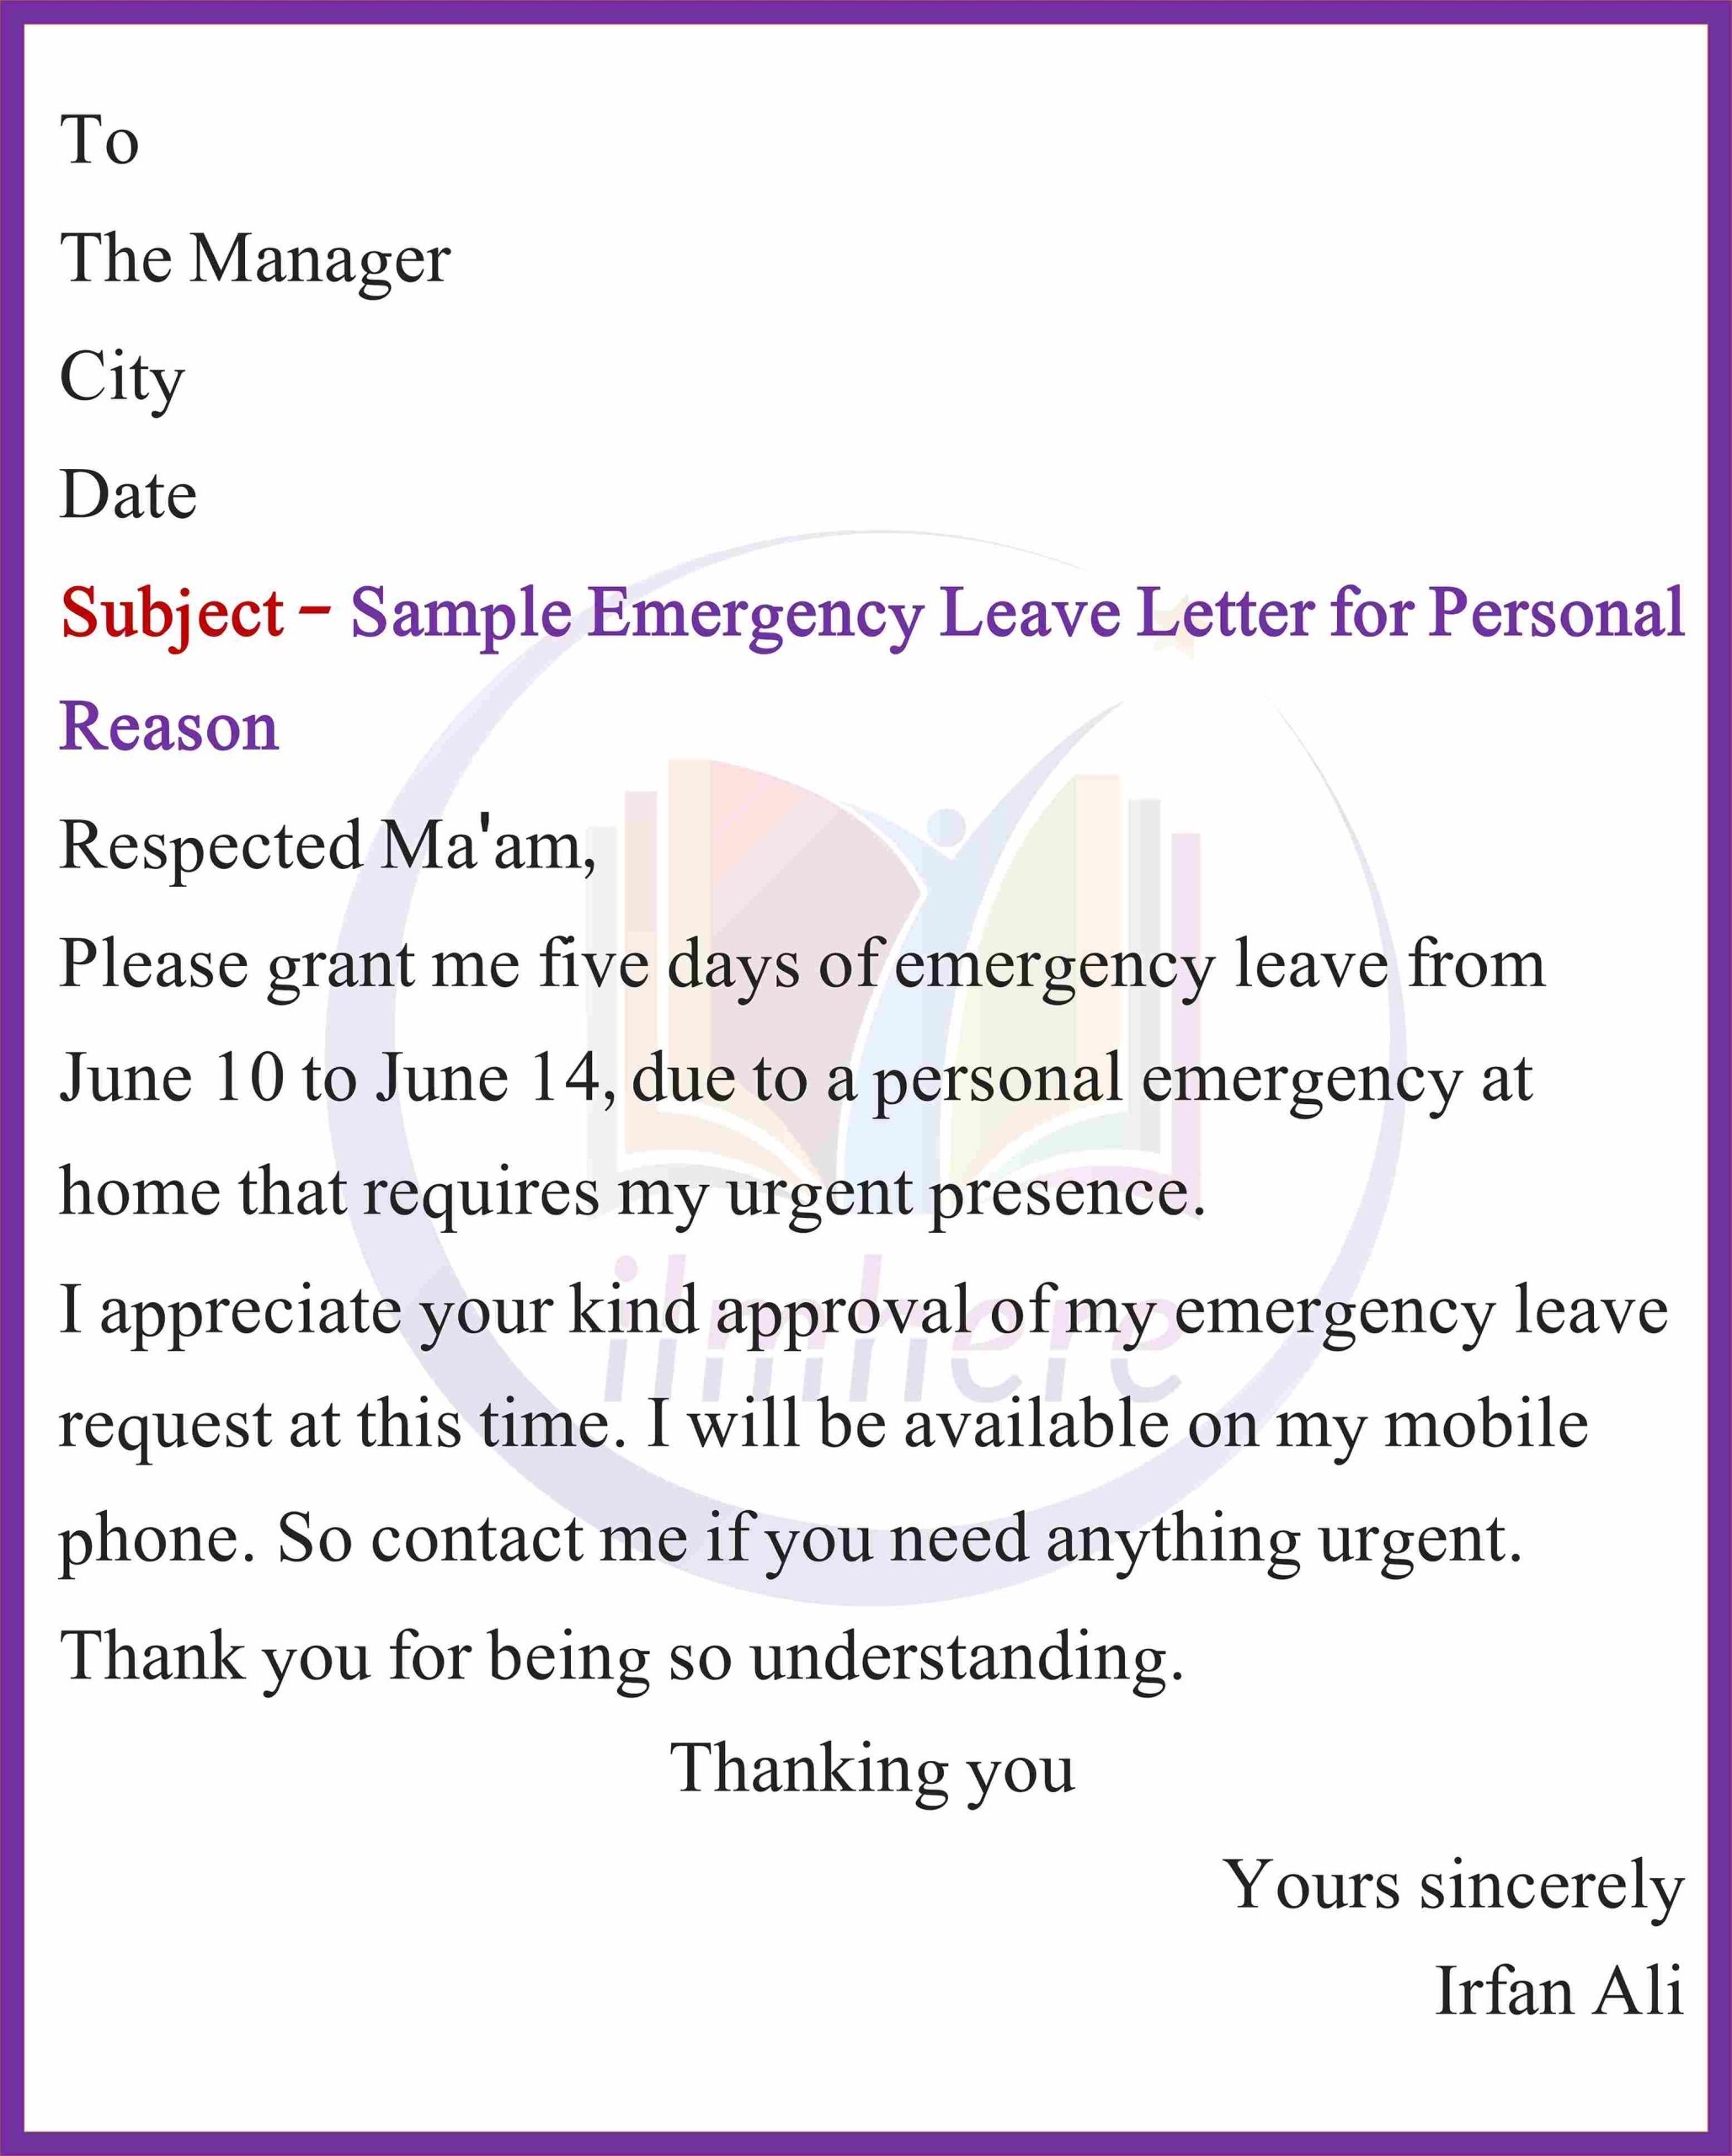 Sample Emergency Leave Letter for Personal Reasons (office) 